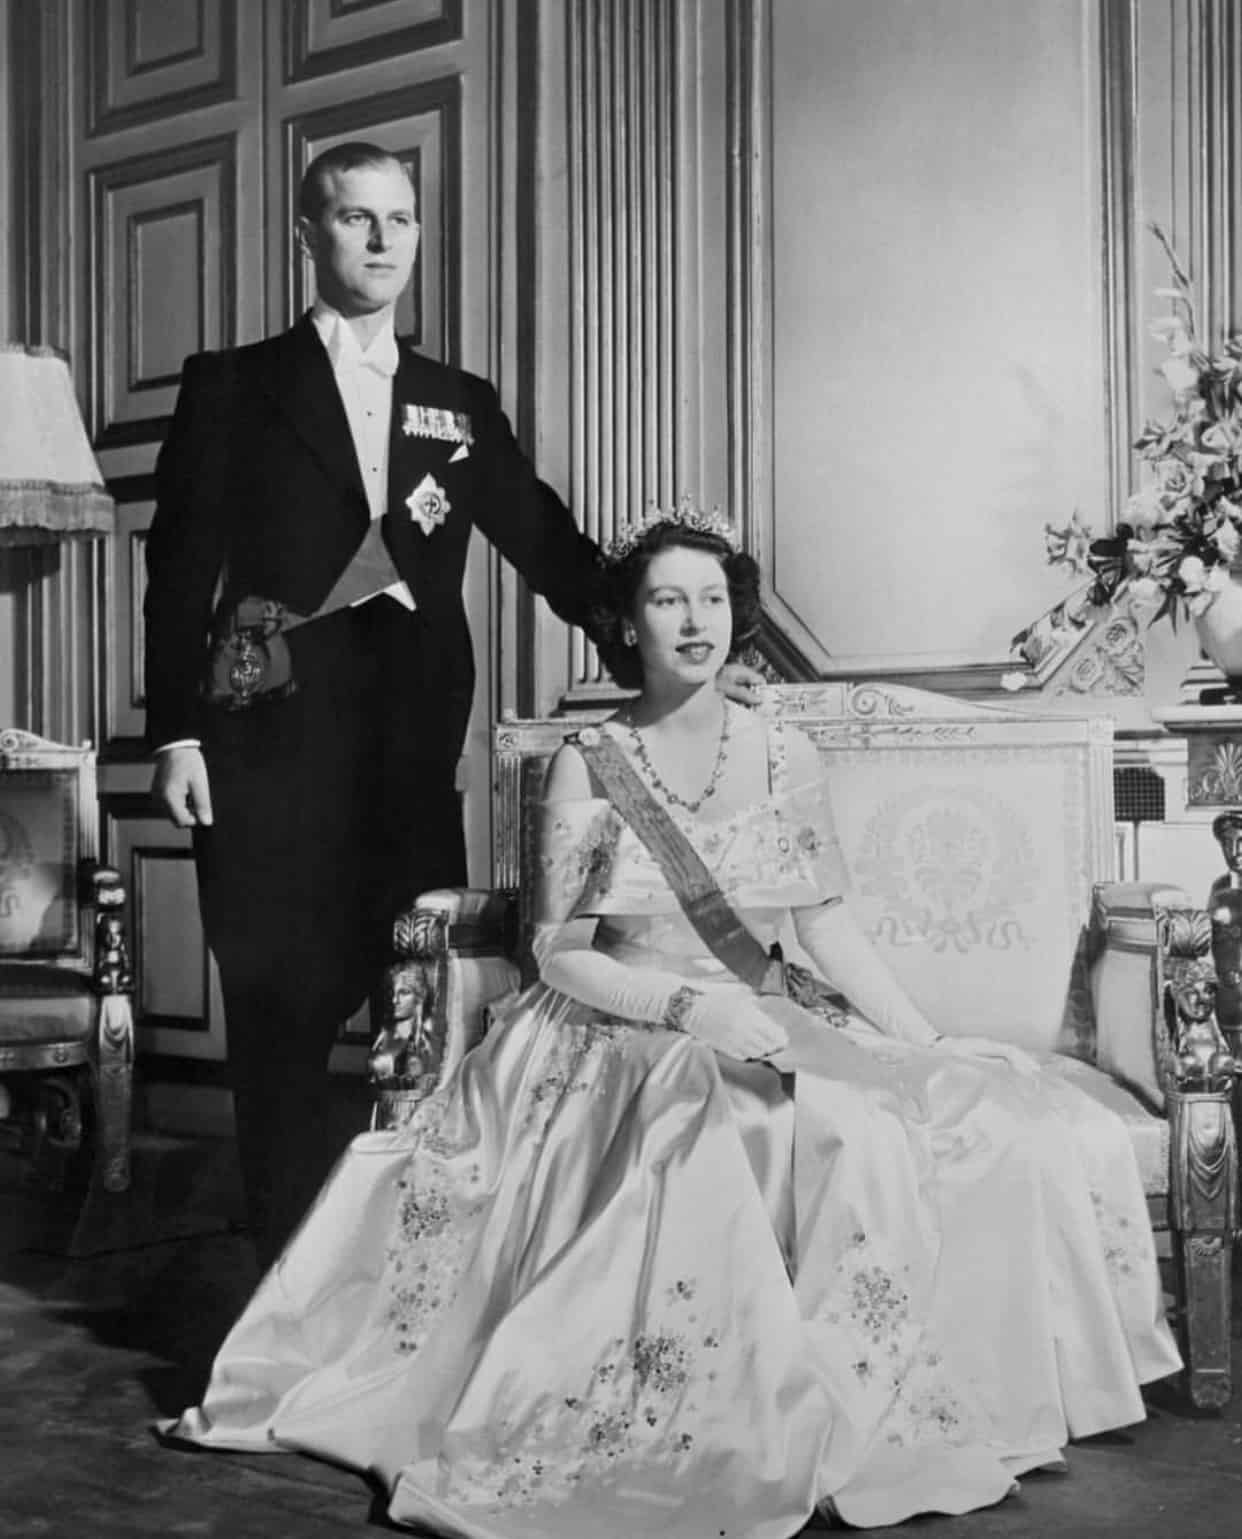 Prince Philip (of Greece) unplugged. What you may not know about his Greek background and his Greek connections 2